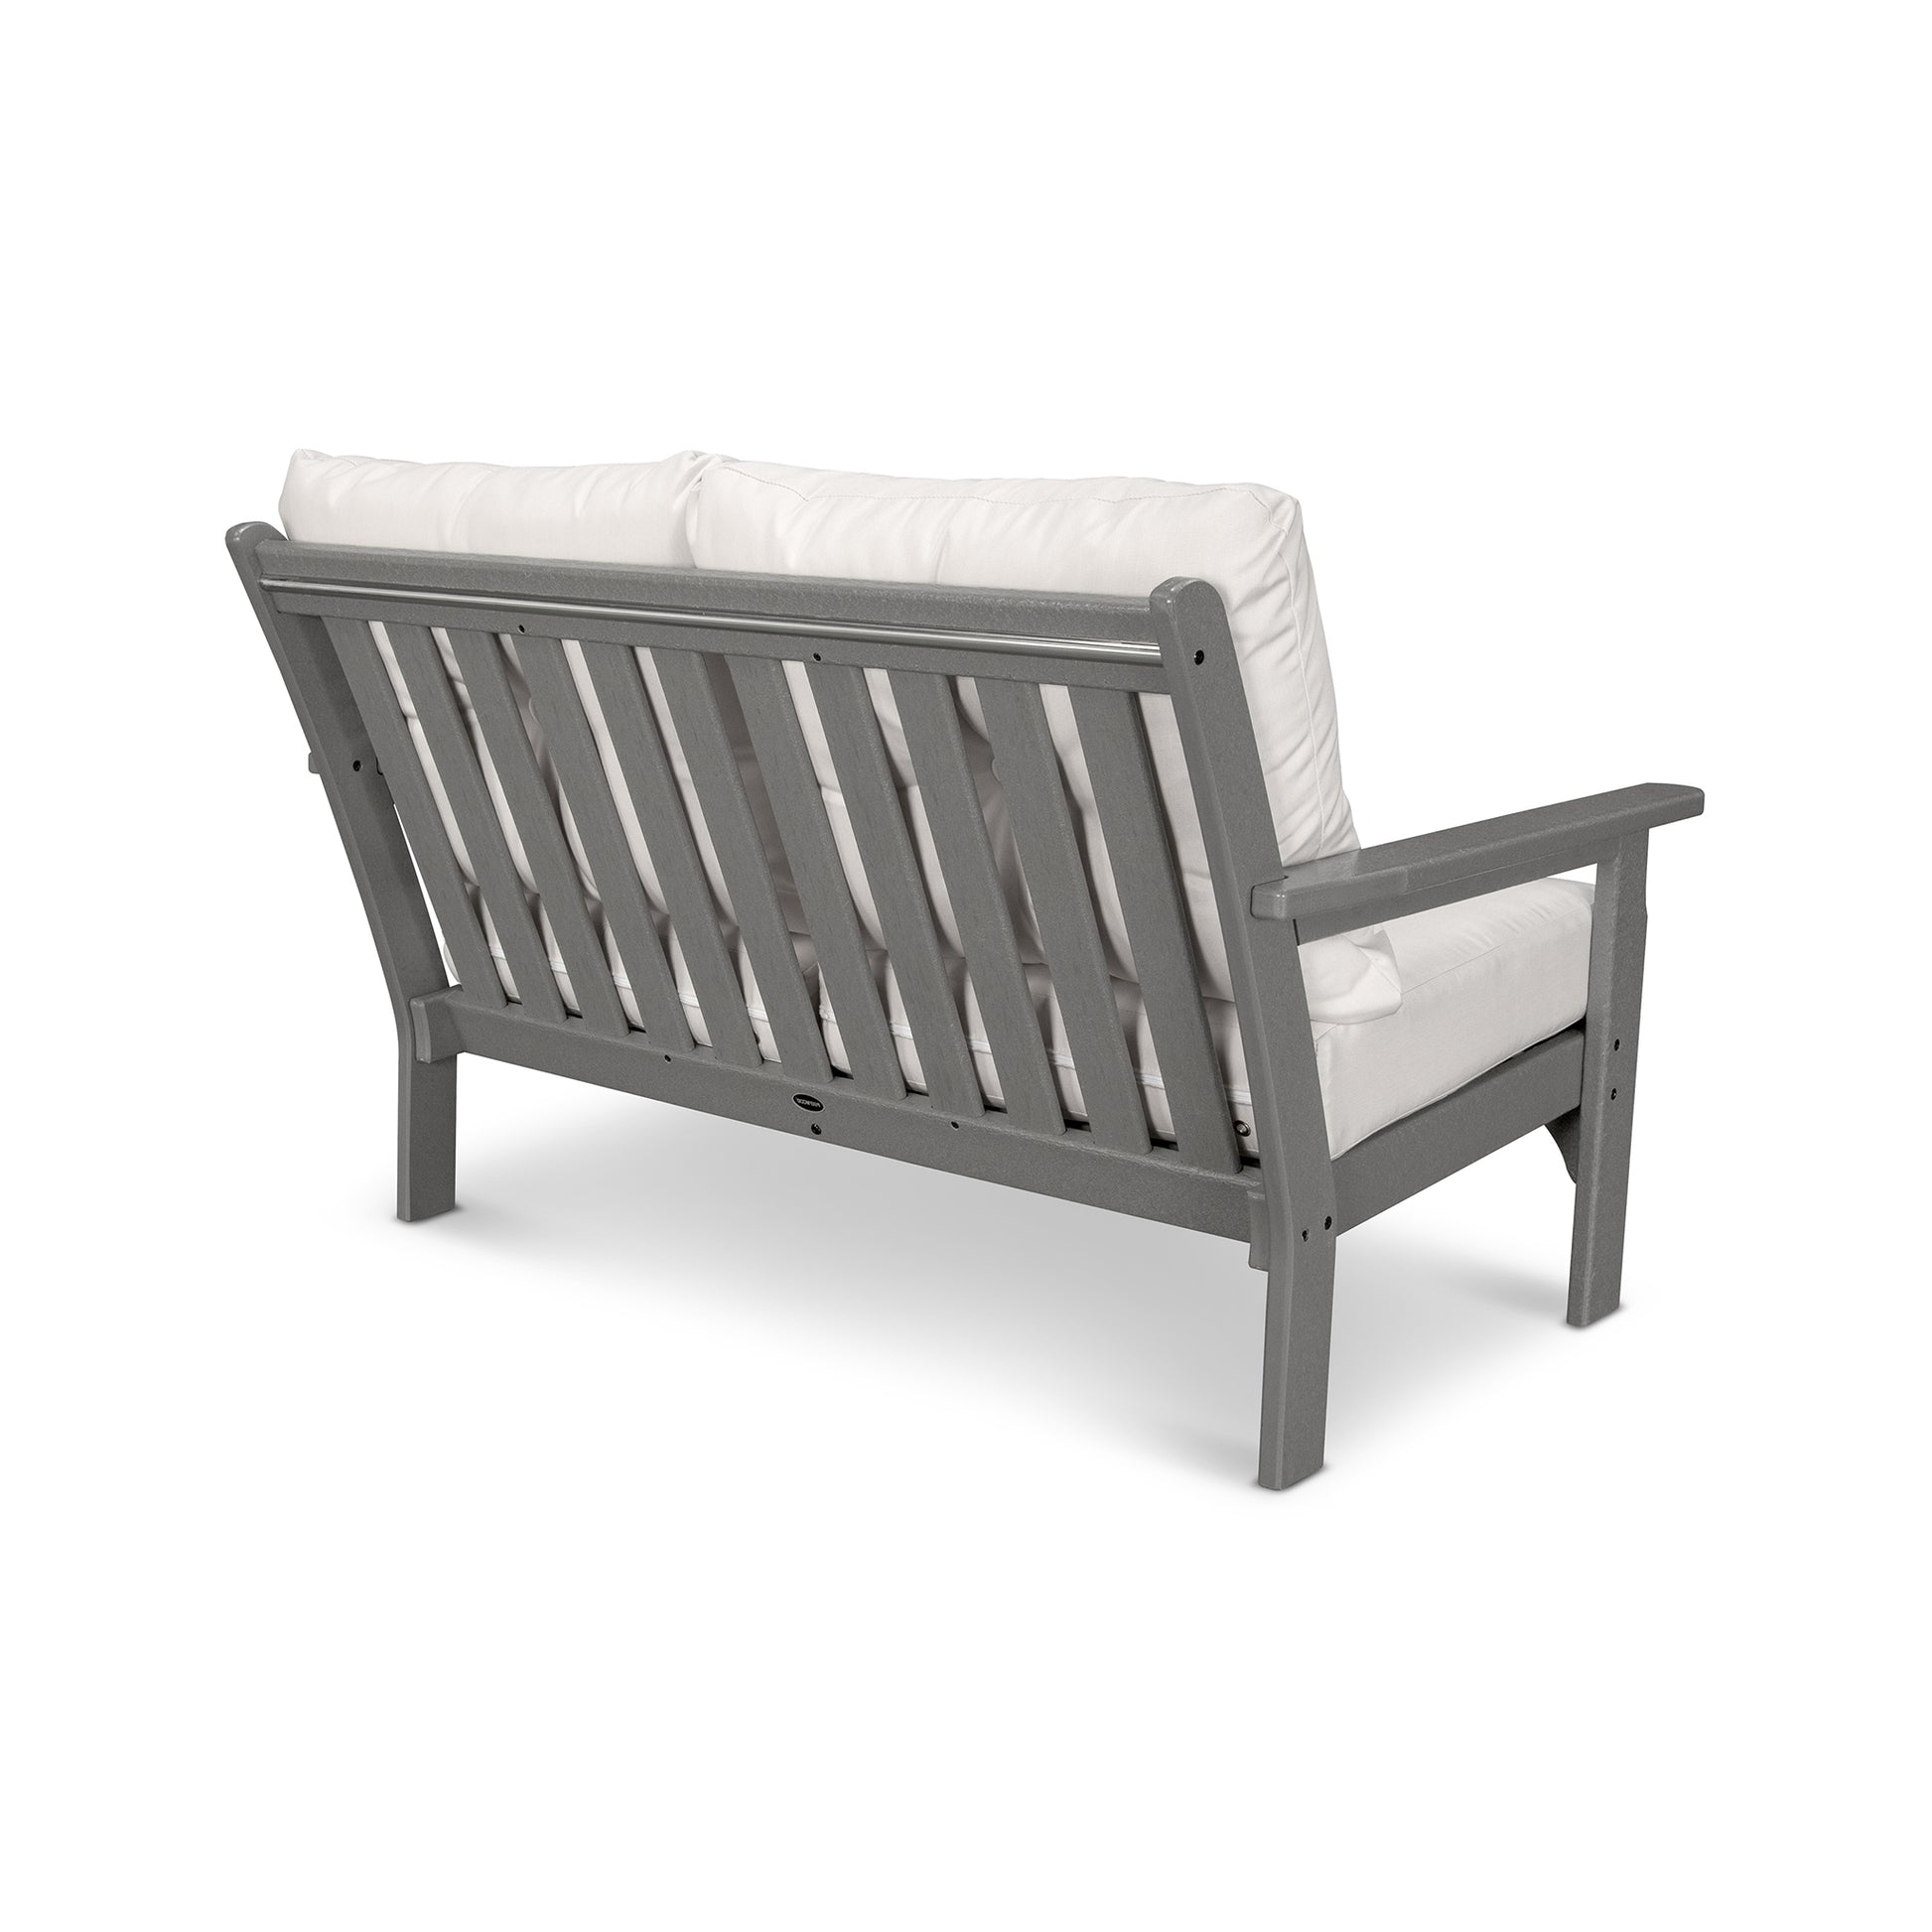 A modern gray POLYWOOD® Vineyard Deep Seating Settee outdoor sofa with white cushions, featuring a slatted back and seat design, isolated on a white background.